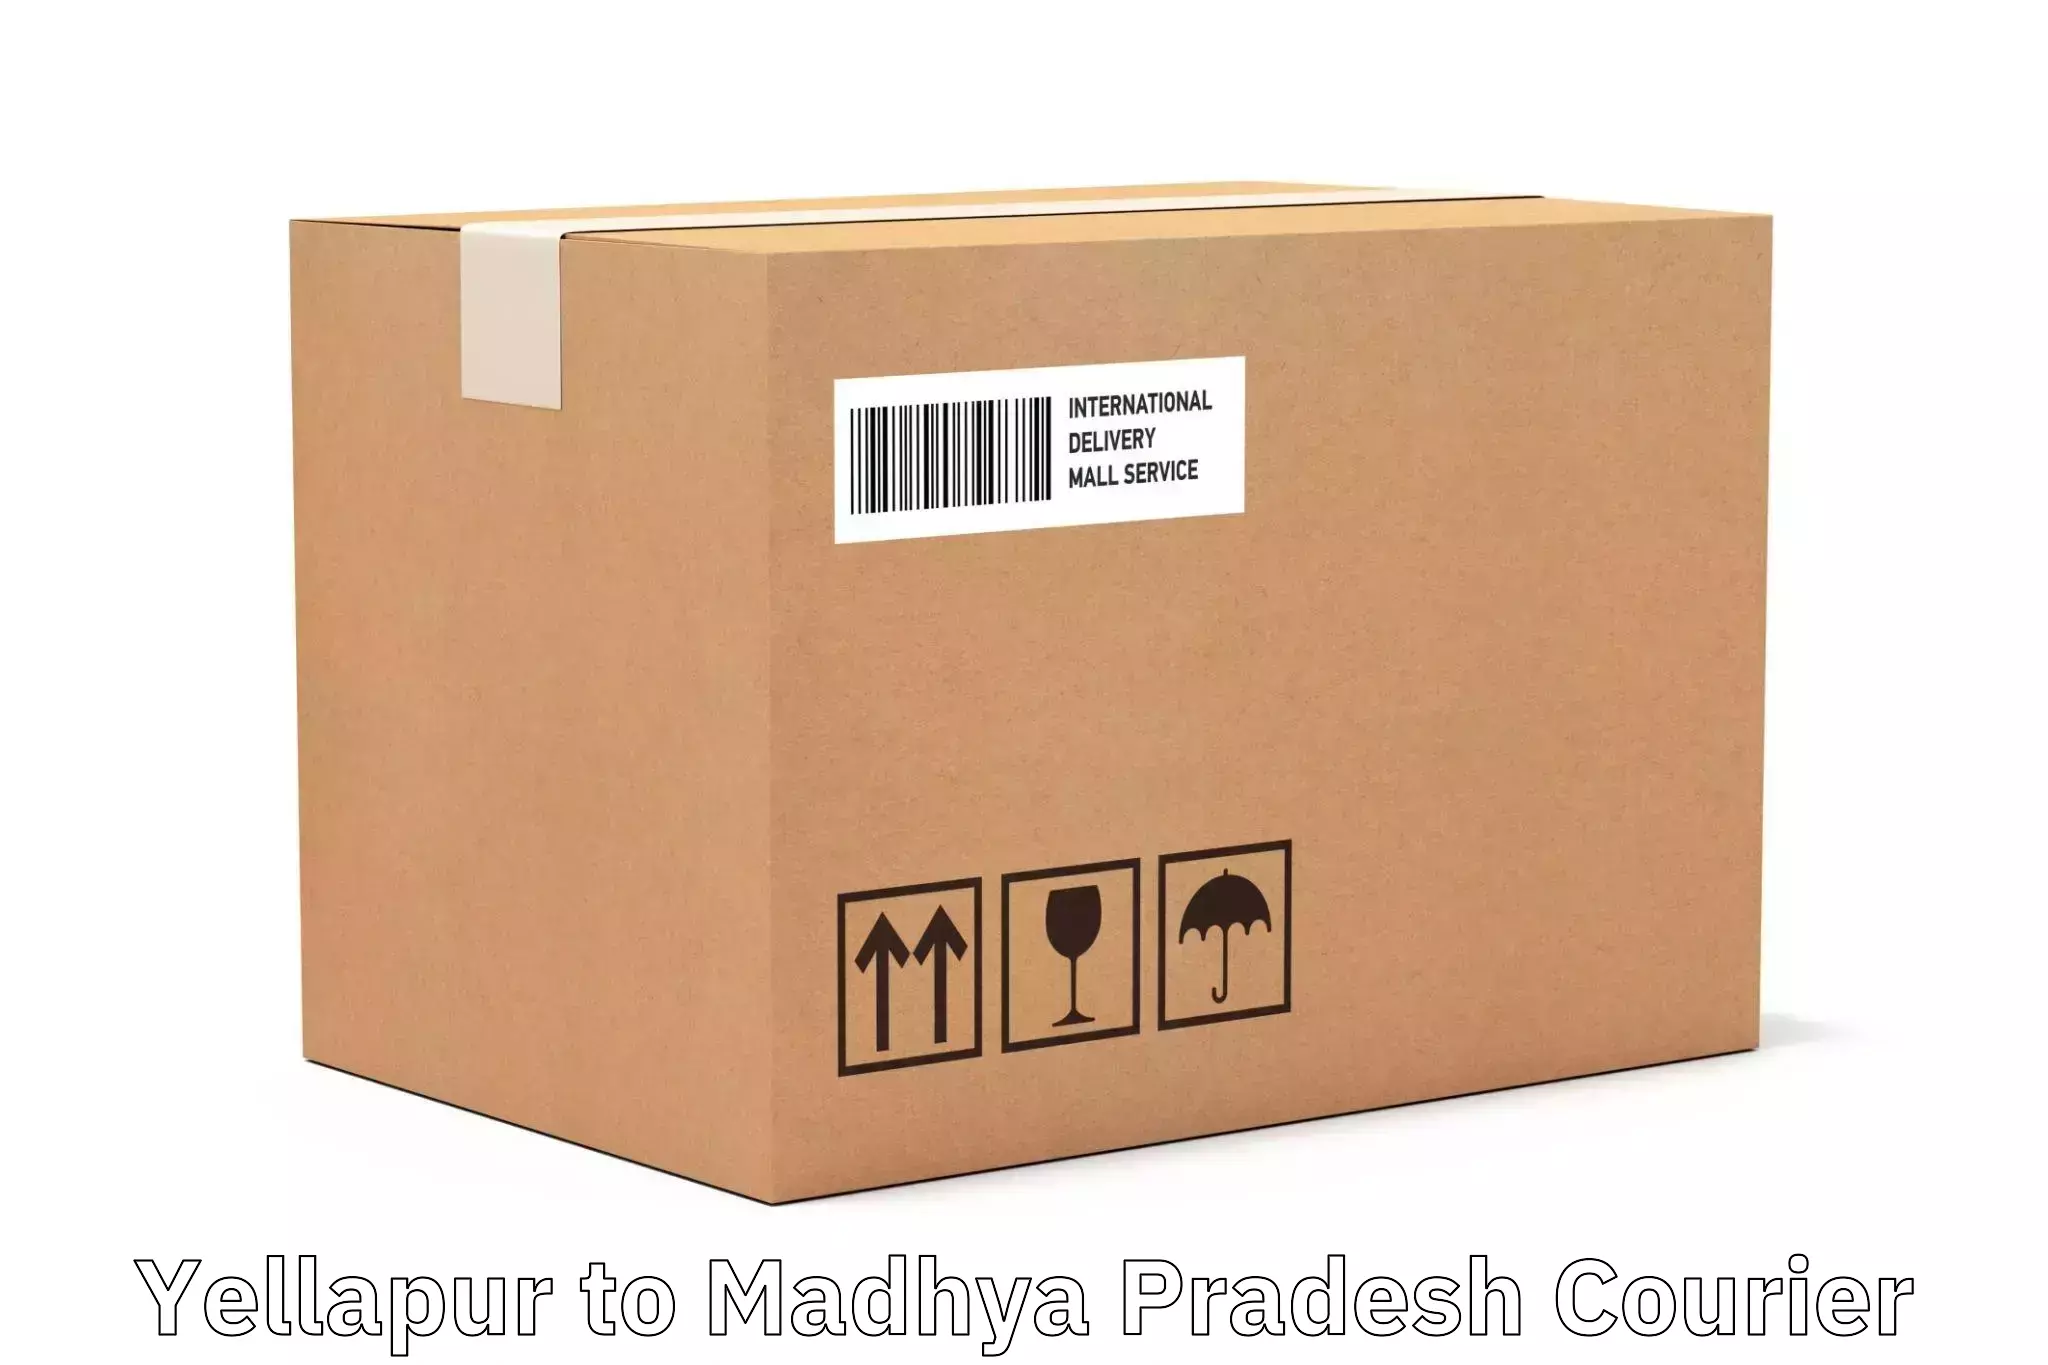 Nationwide parcel services Yellapur to Sheopur